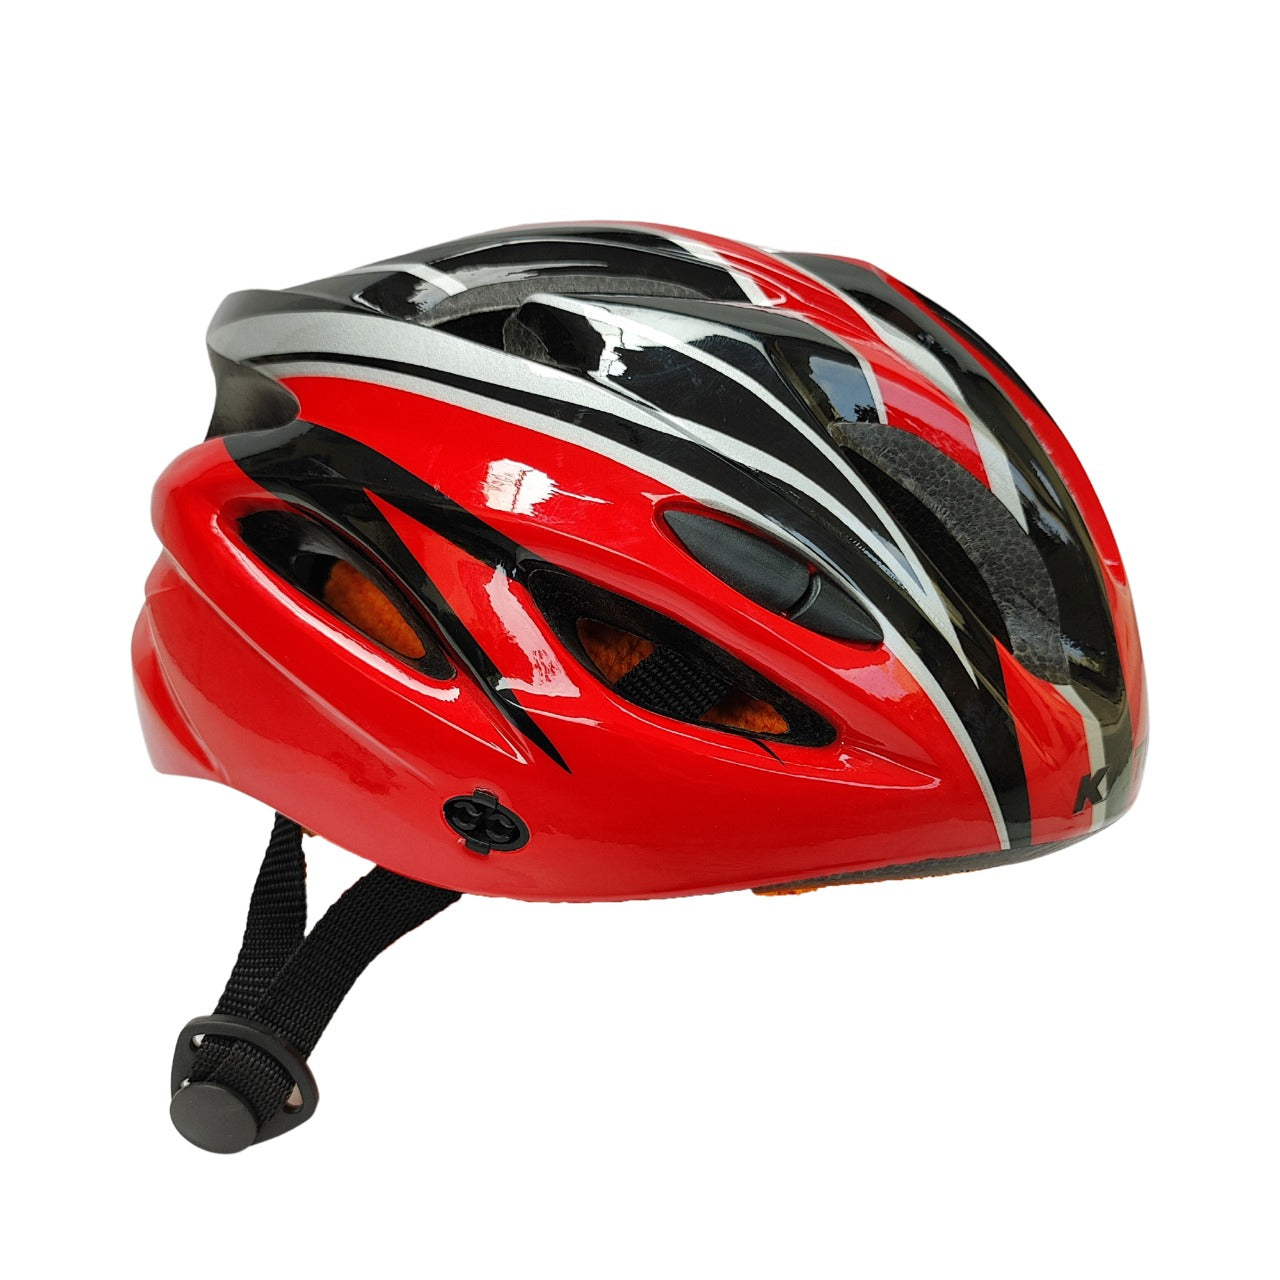 Buy Online Light Weight Bicycle Safety Helmet In India by Omobikes